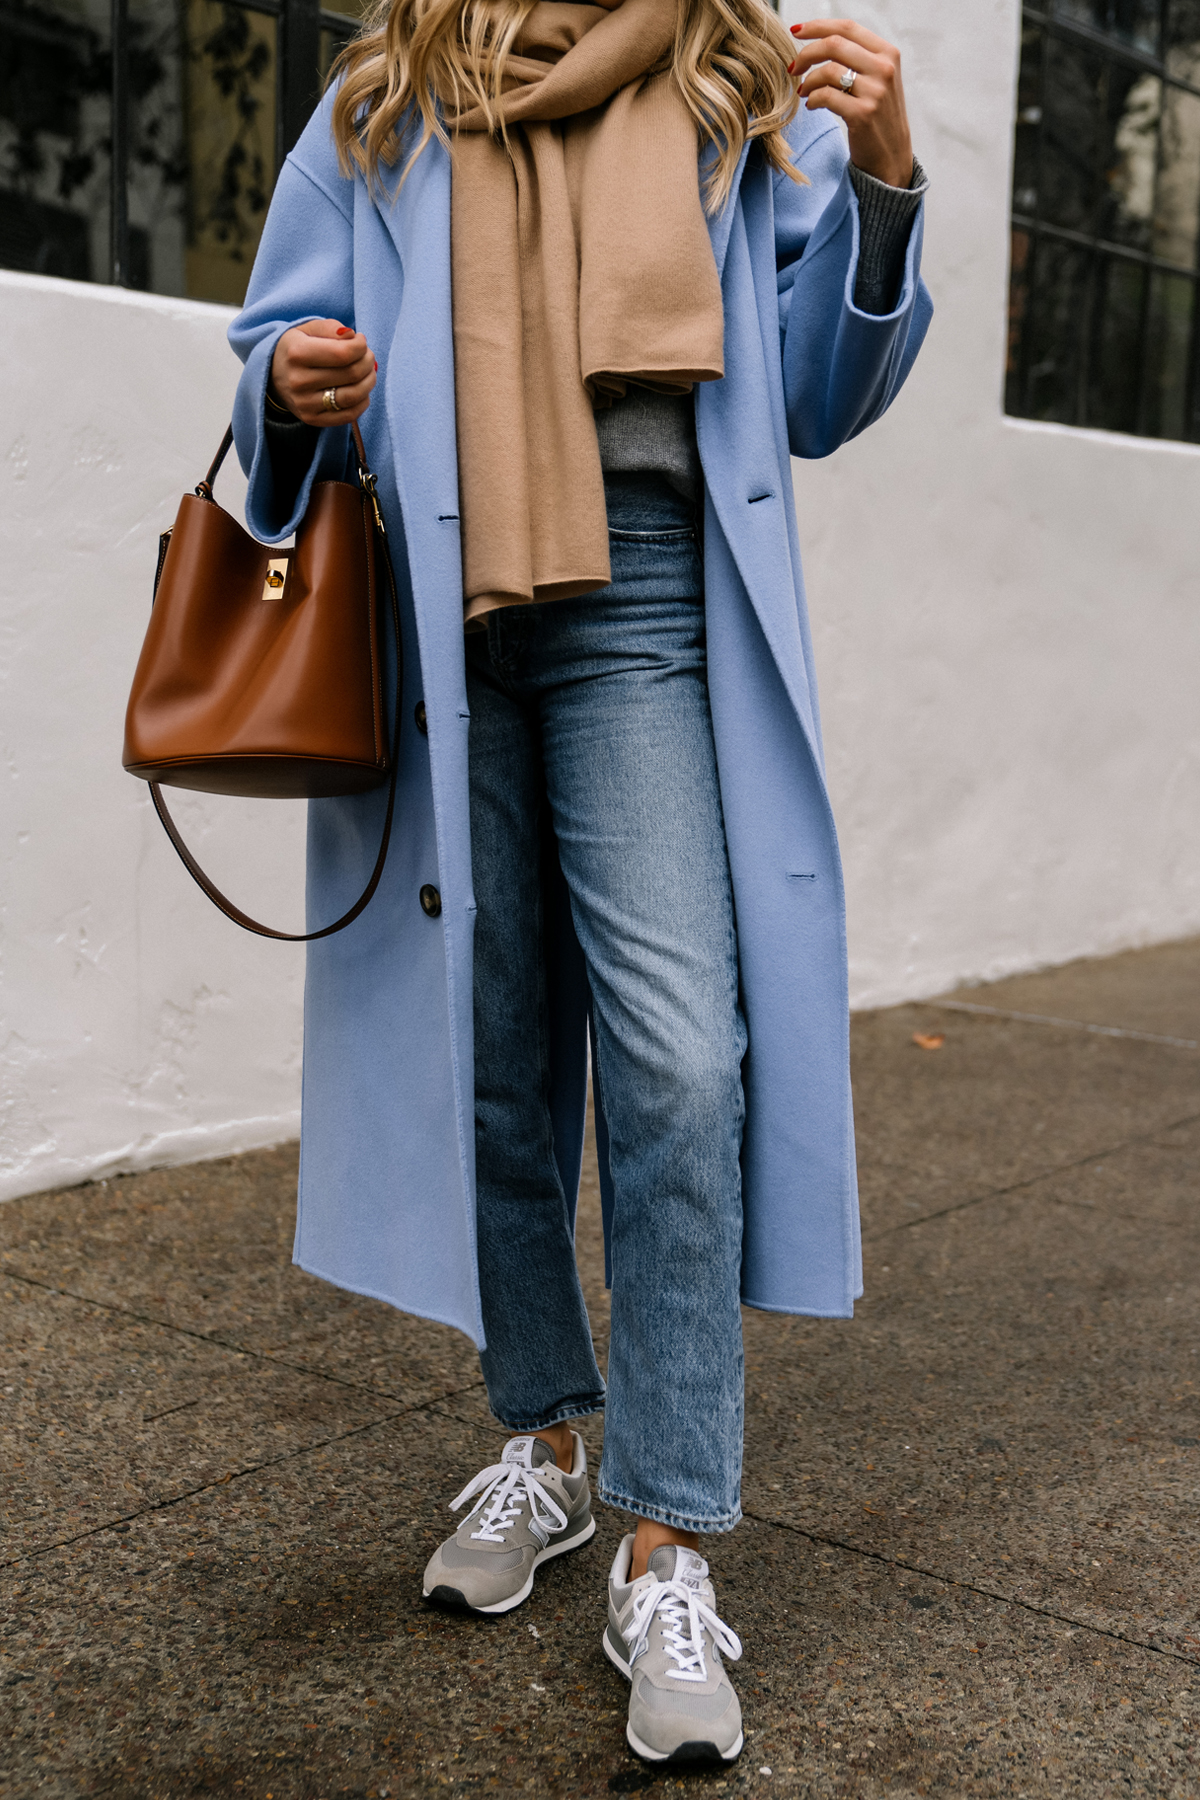 Fashion Jackson Wearing Loulou Studio Borneo Womens Blue Coat Camel Scarf AGOLDE Jeans Celine Bucket 16 Bag Winter Coat and Sneakers Outfits with New Balance 574 Street Style 1